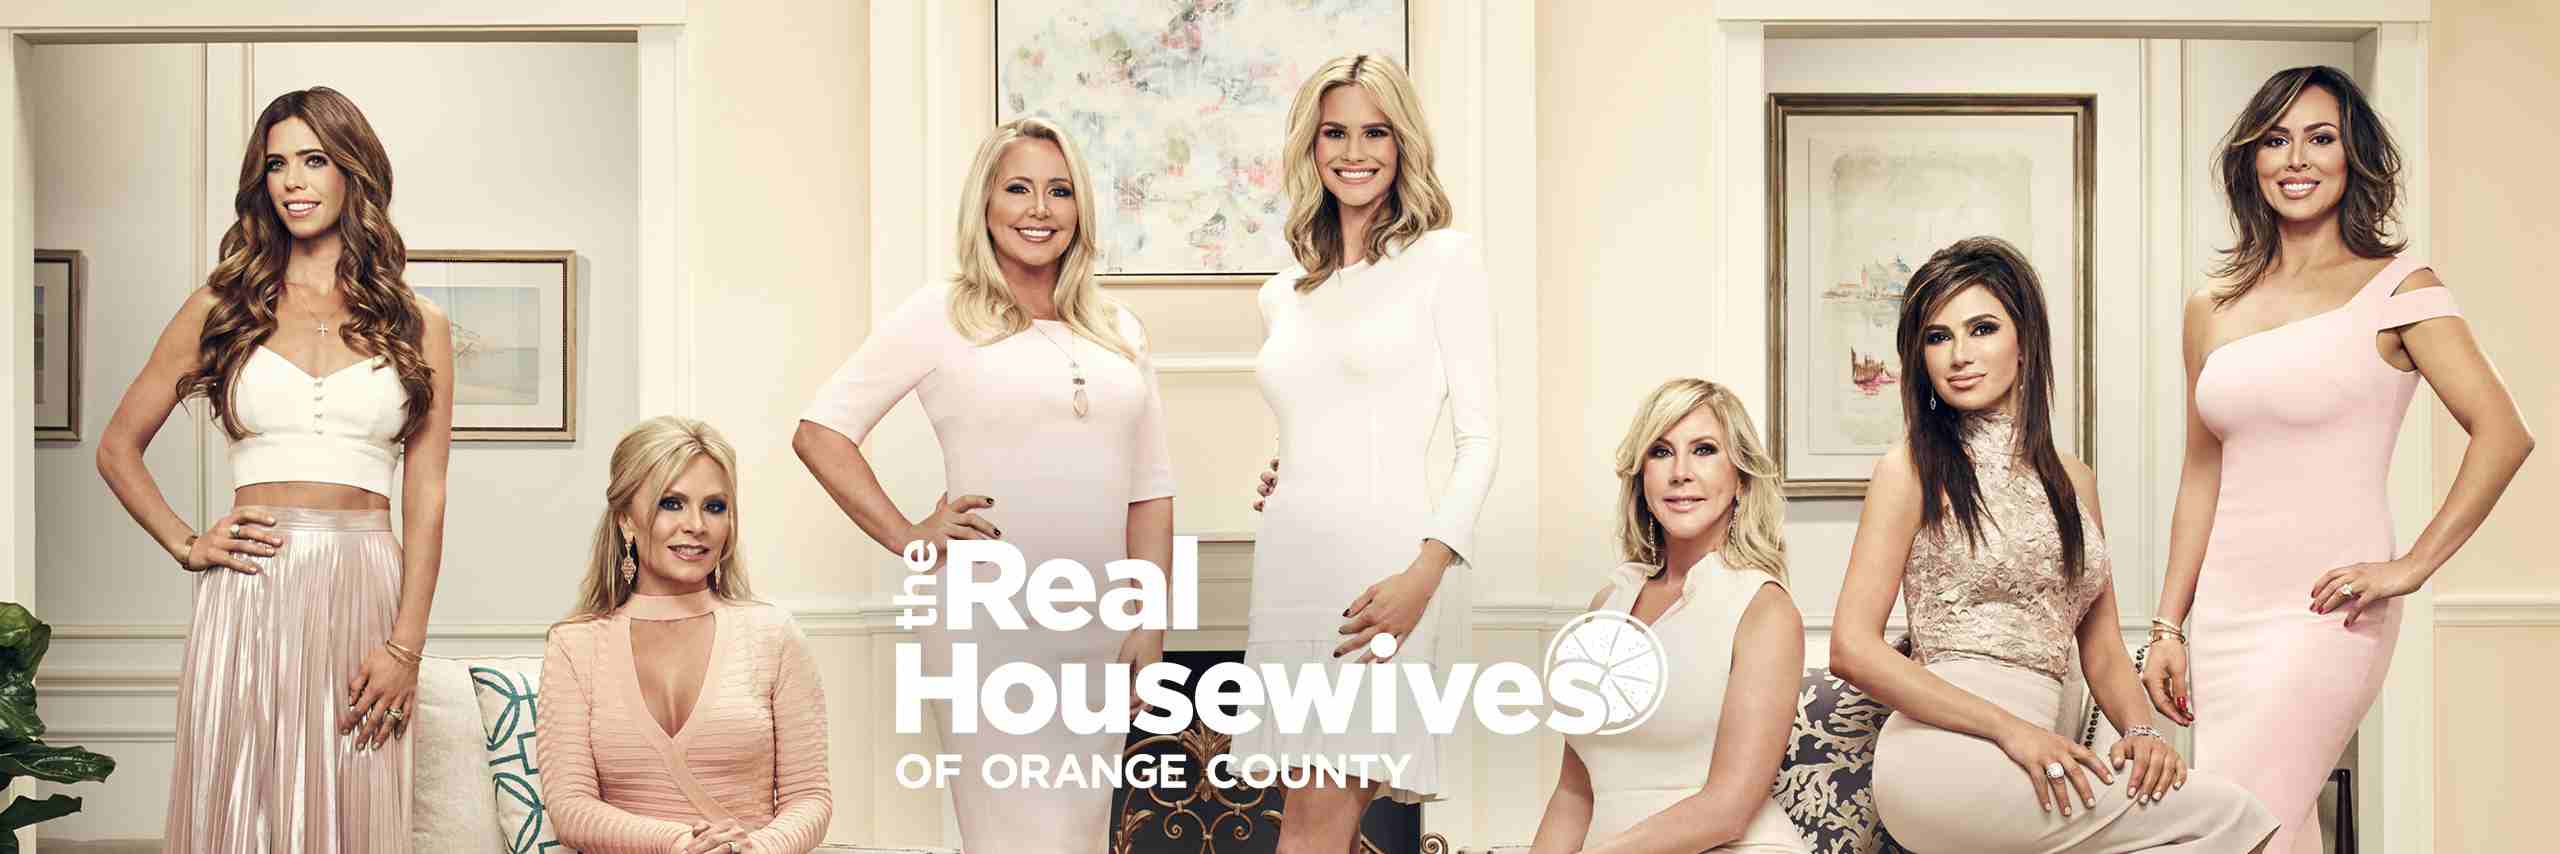 Série Les real housewives d'orange county en streaming vf